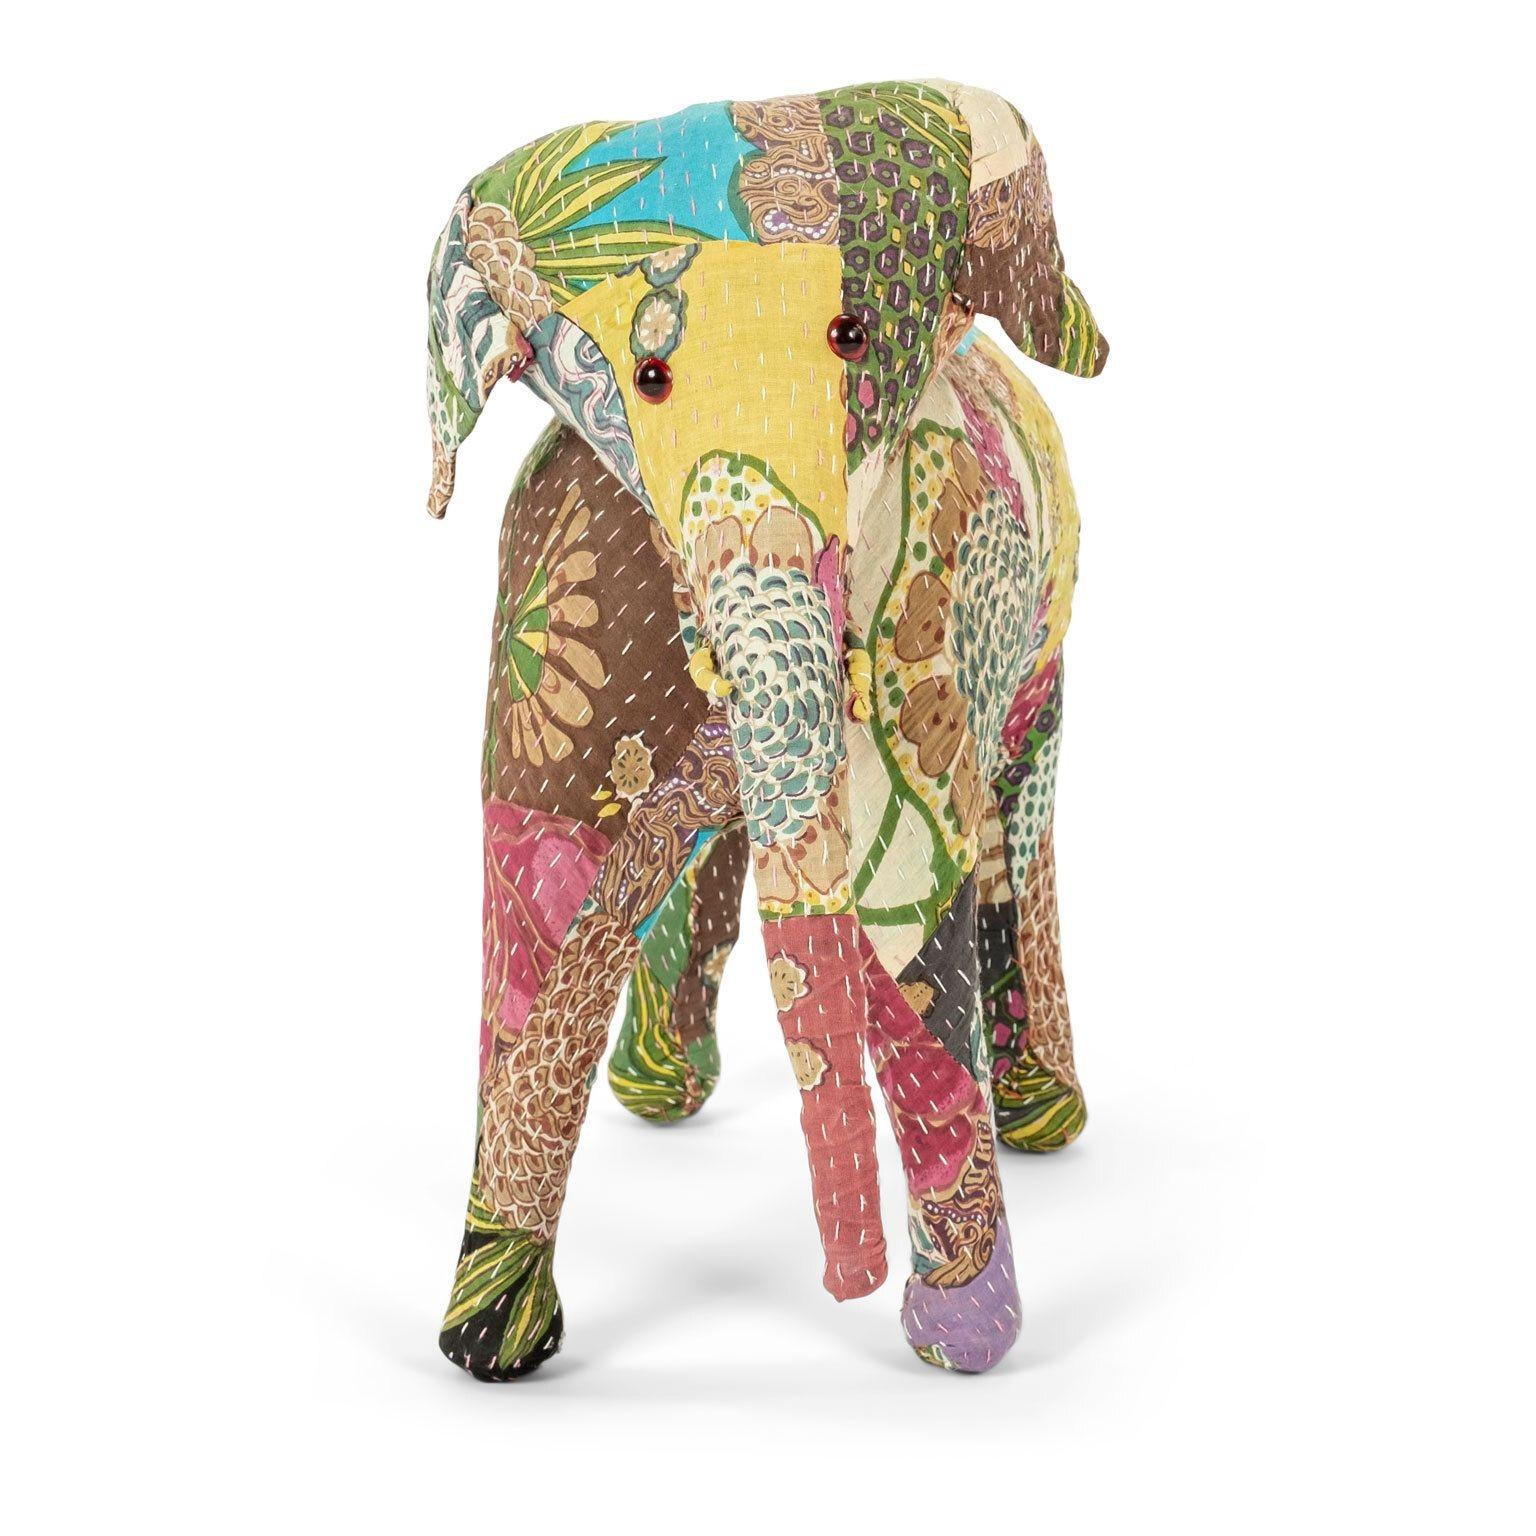 Vintage cotton elephant, covered in Indian textiles, retailed in the 1950s by Harrods. Interior frame composed of wire and straw. Textiles originally sourced through Liberty's of London.